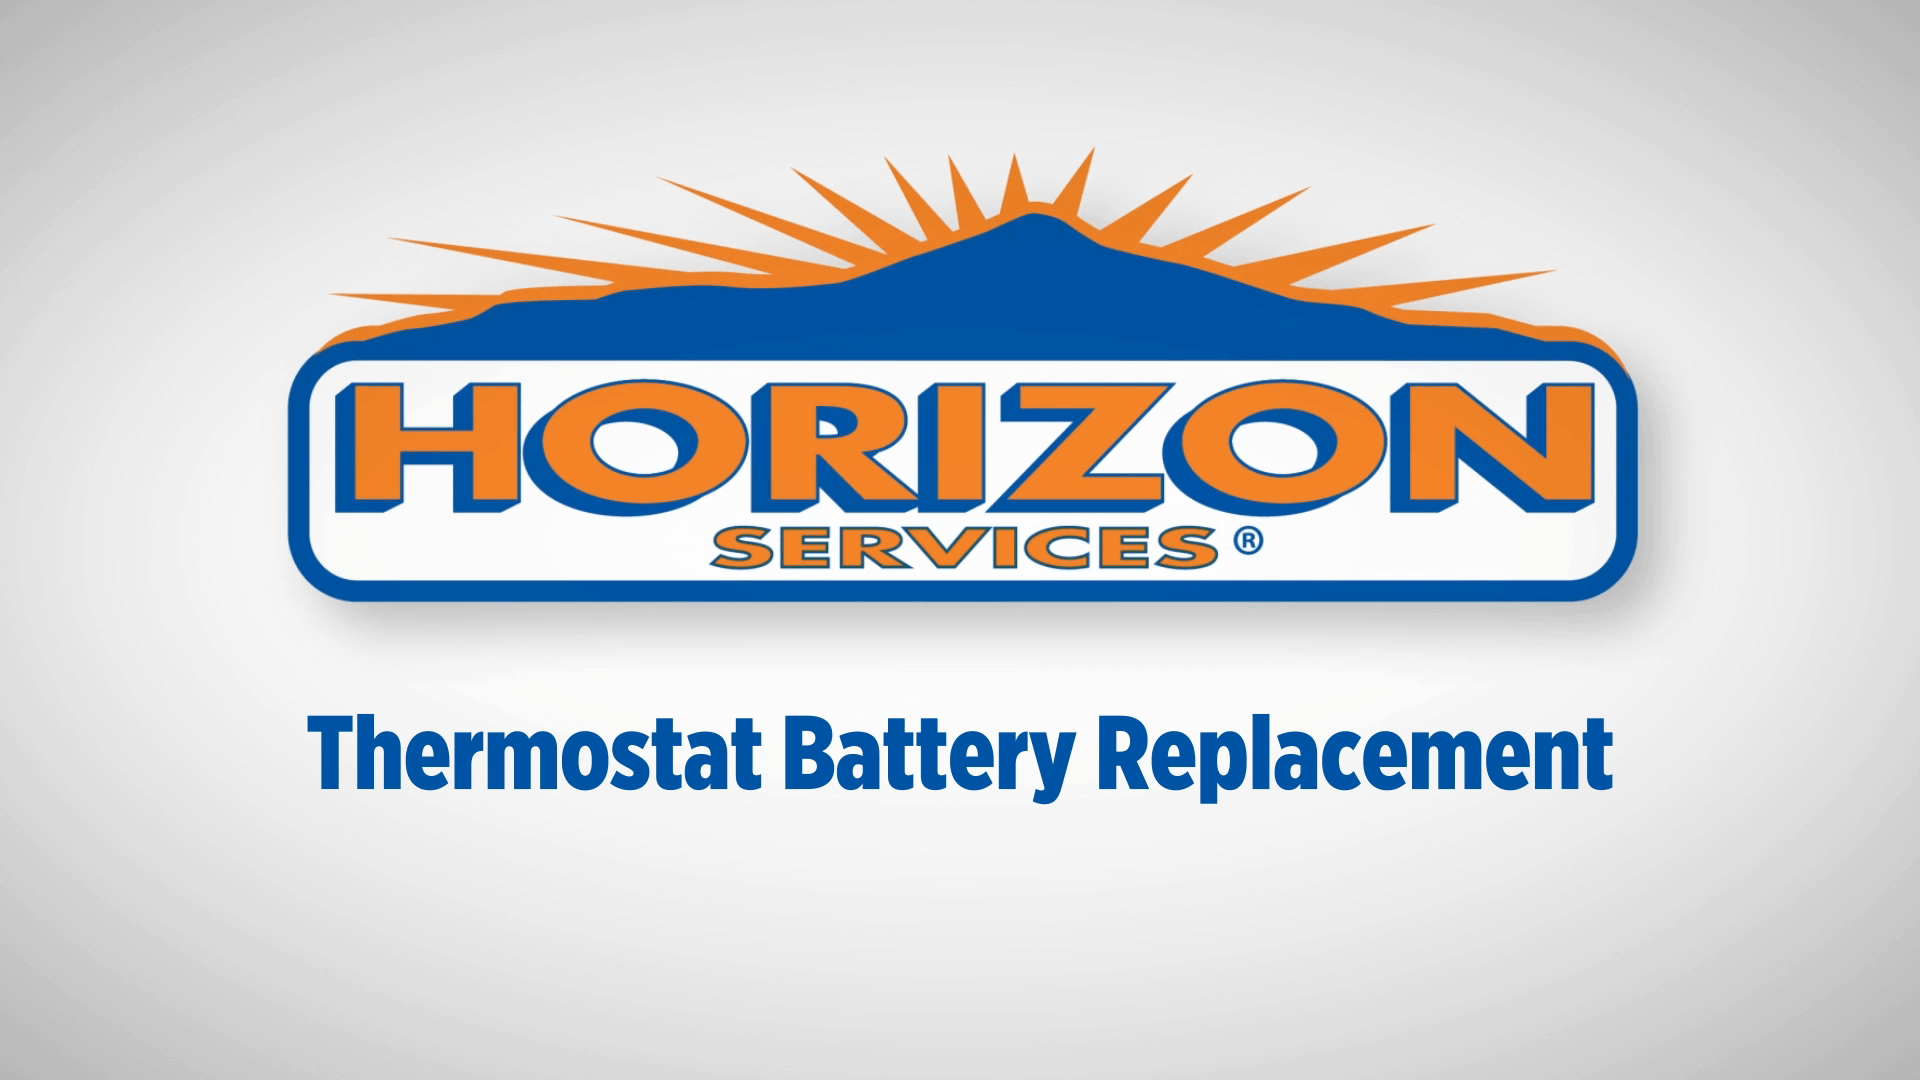 Horizon Services logo with thermostat battery replacement text